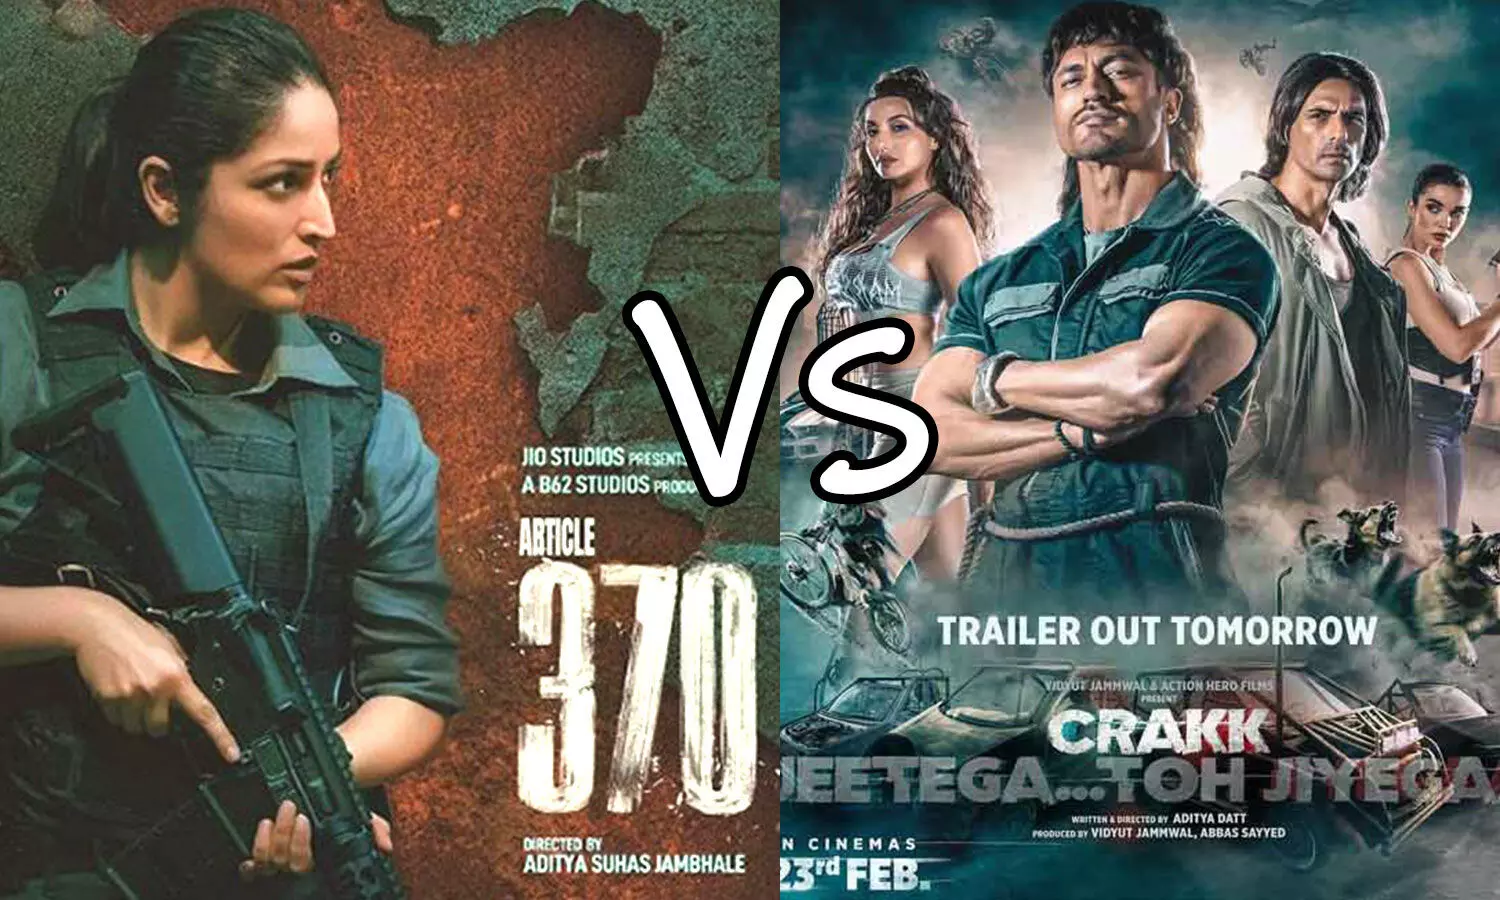 Article 370 surprises at the box office